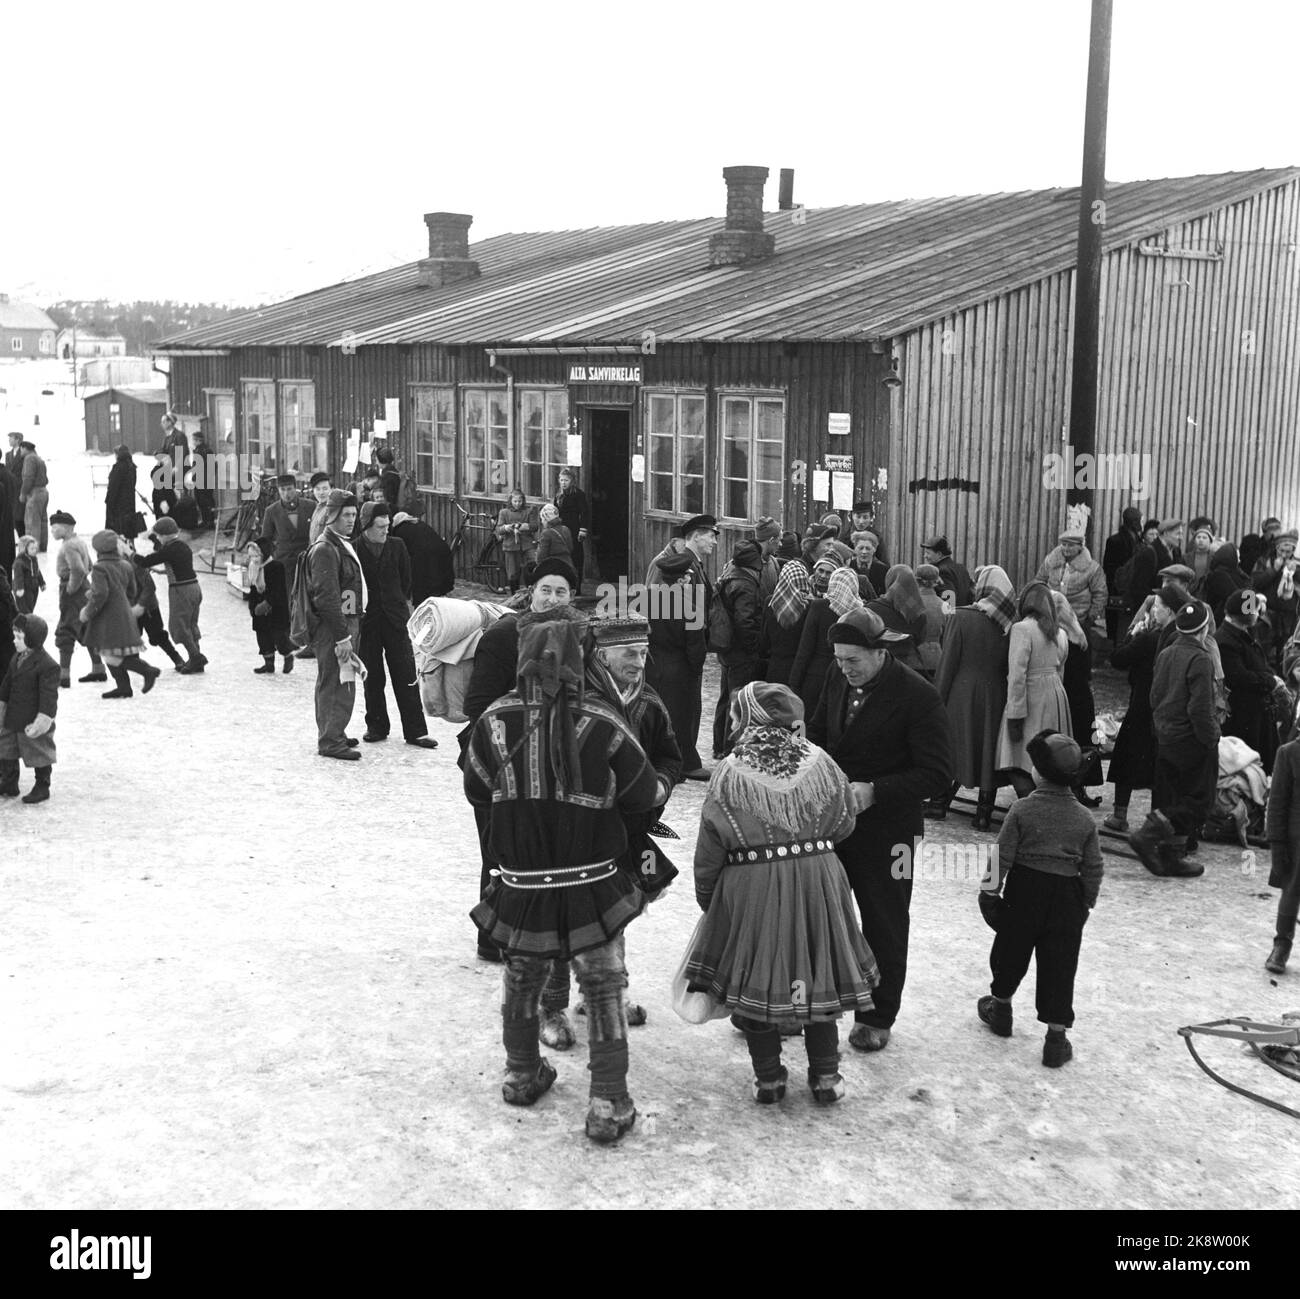 Alta, Bossekop 19520419. Bossekop- The market, the large famous Sami market that is gathered every year at the Samvirkelaget in Alta. Here, there are many from the ridges nearby to sell household goods, reindeer meat and leather. The trade goes lively. The goods are transported in bags by truck from Gargia Fjellstue, which is the gathering place for the Sami after they have come down from Vidda. The clerkers at the Samvirkelaget receive approx. 40-50,000 kg. Meat delivered to the market in the days it lasts. Photo: Sverre A. Børretzen / Current / NTB Stock Photo